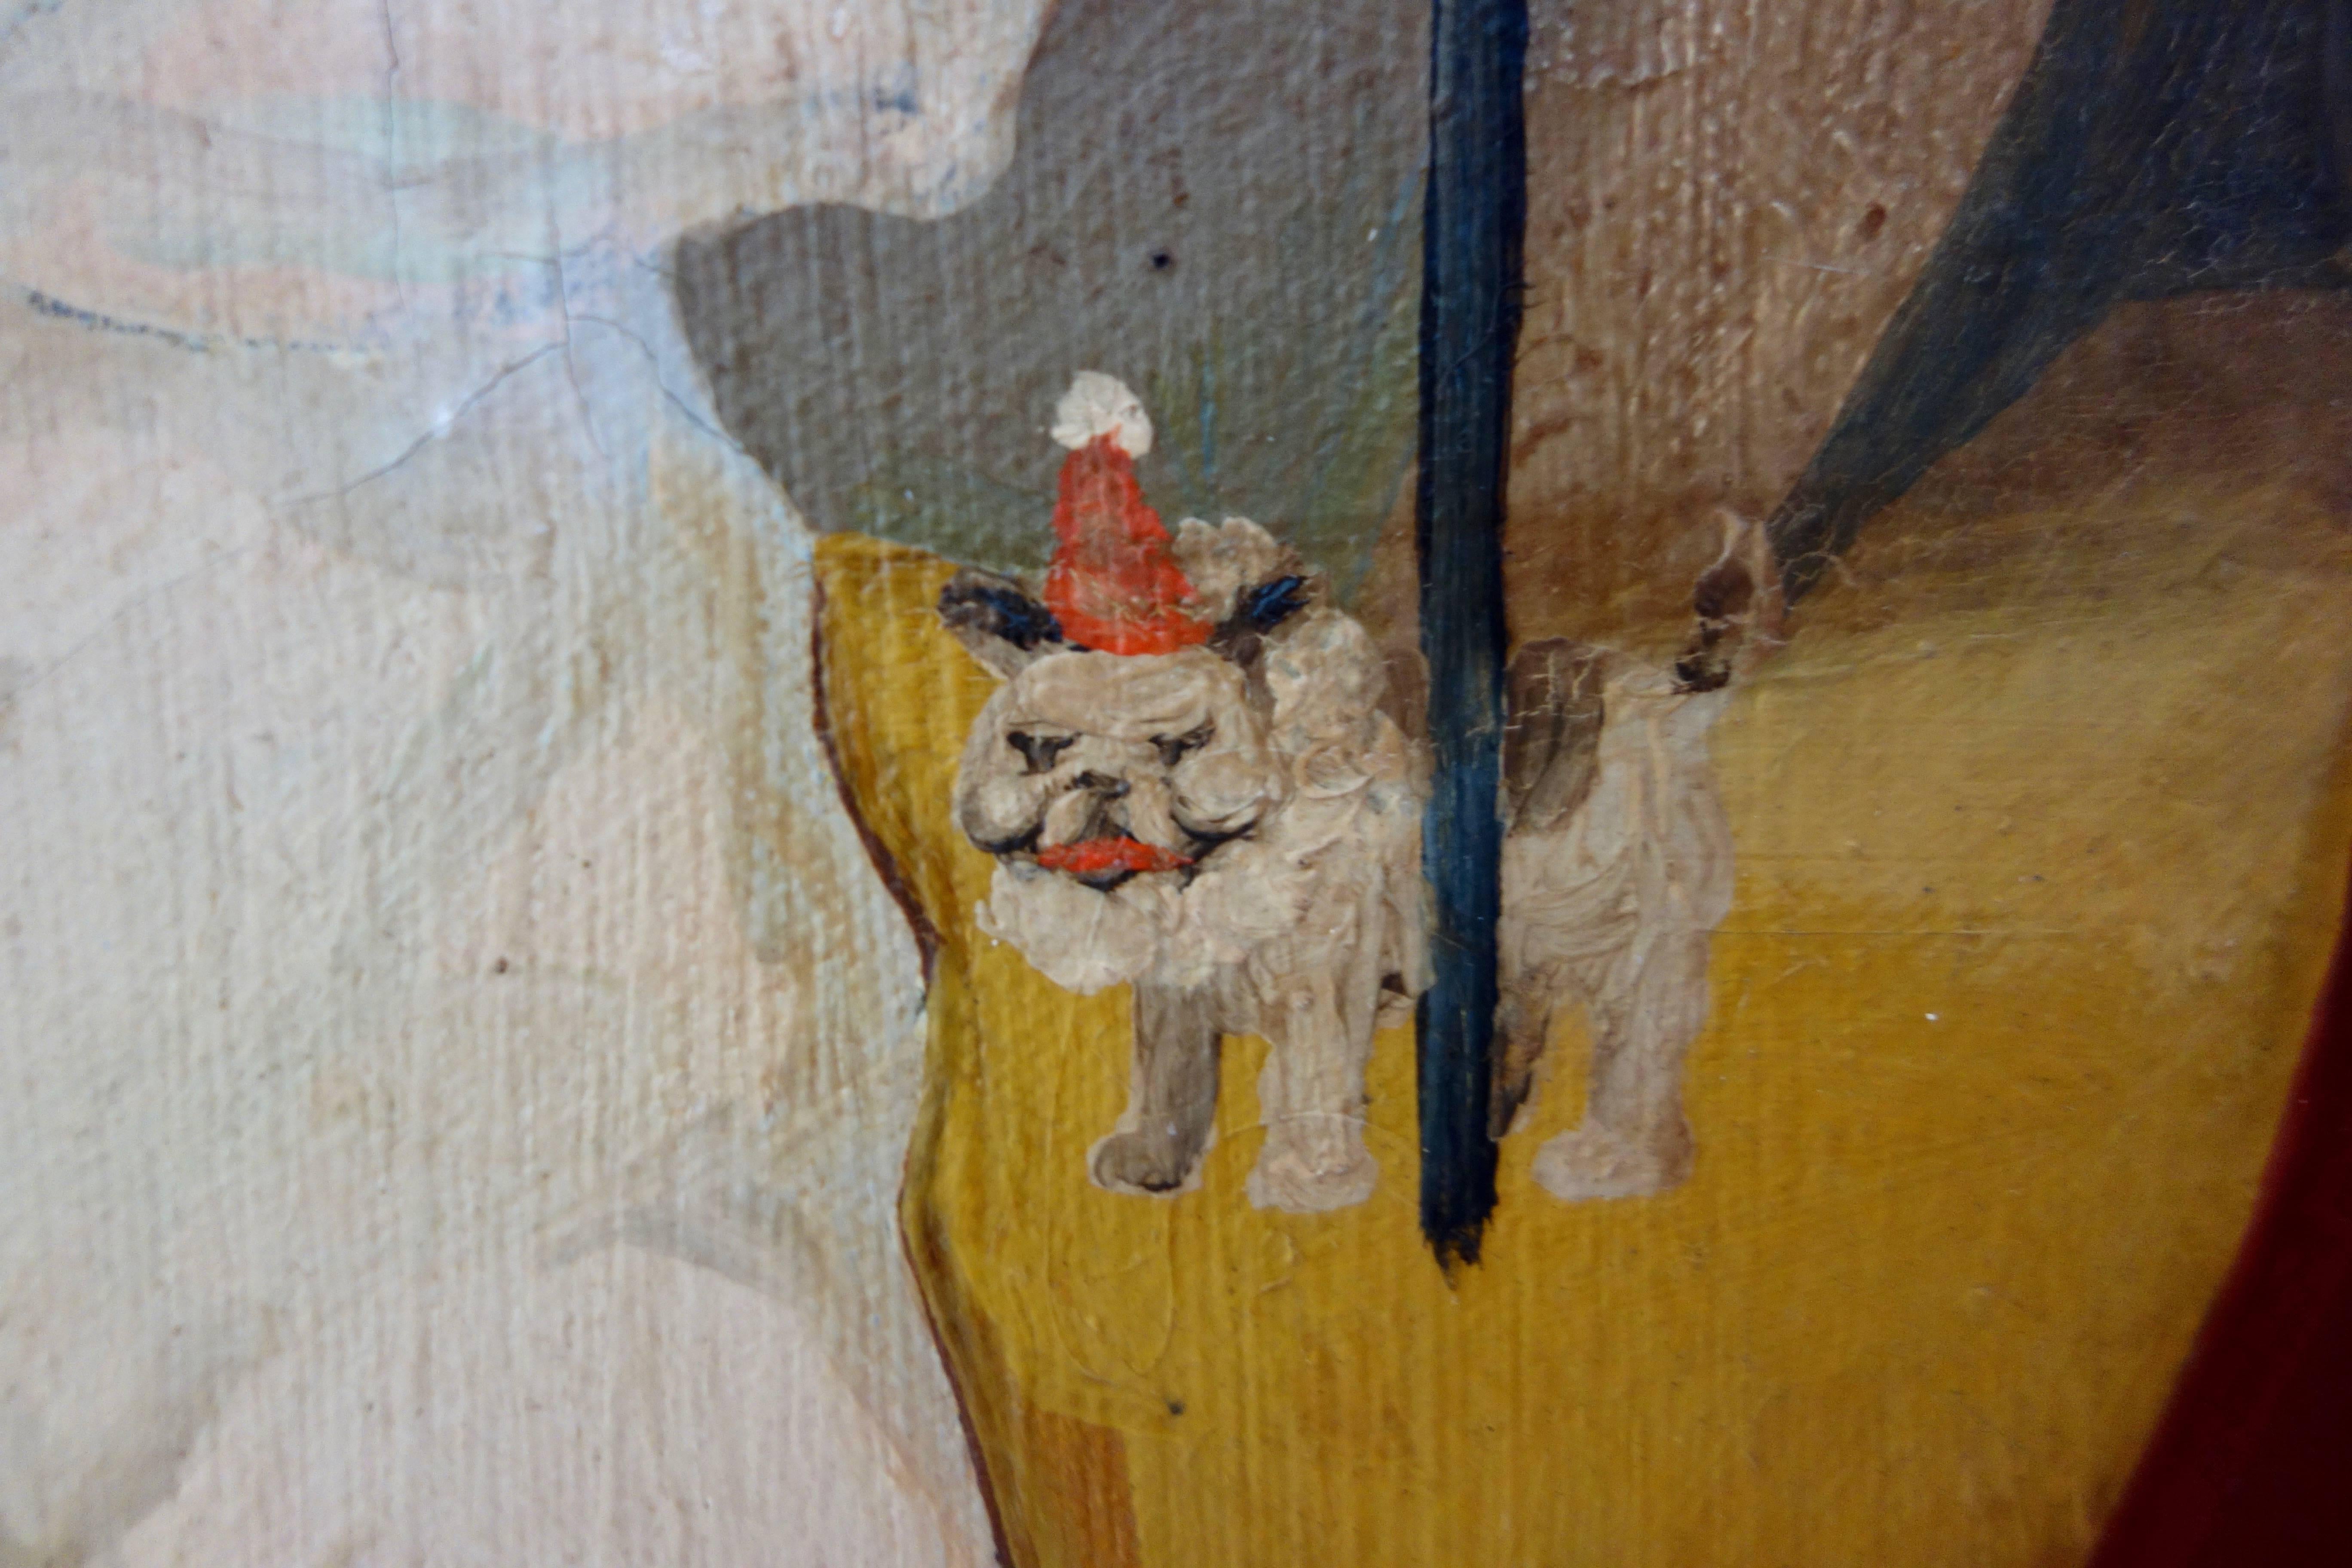 This is a playful circus freak show painting depicting a nude woman, little person, and pug dog wearing a party hat, circa 1930.